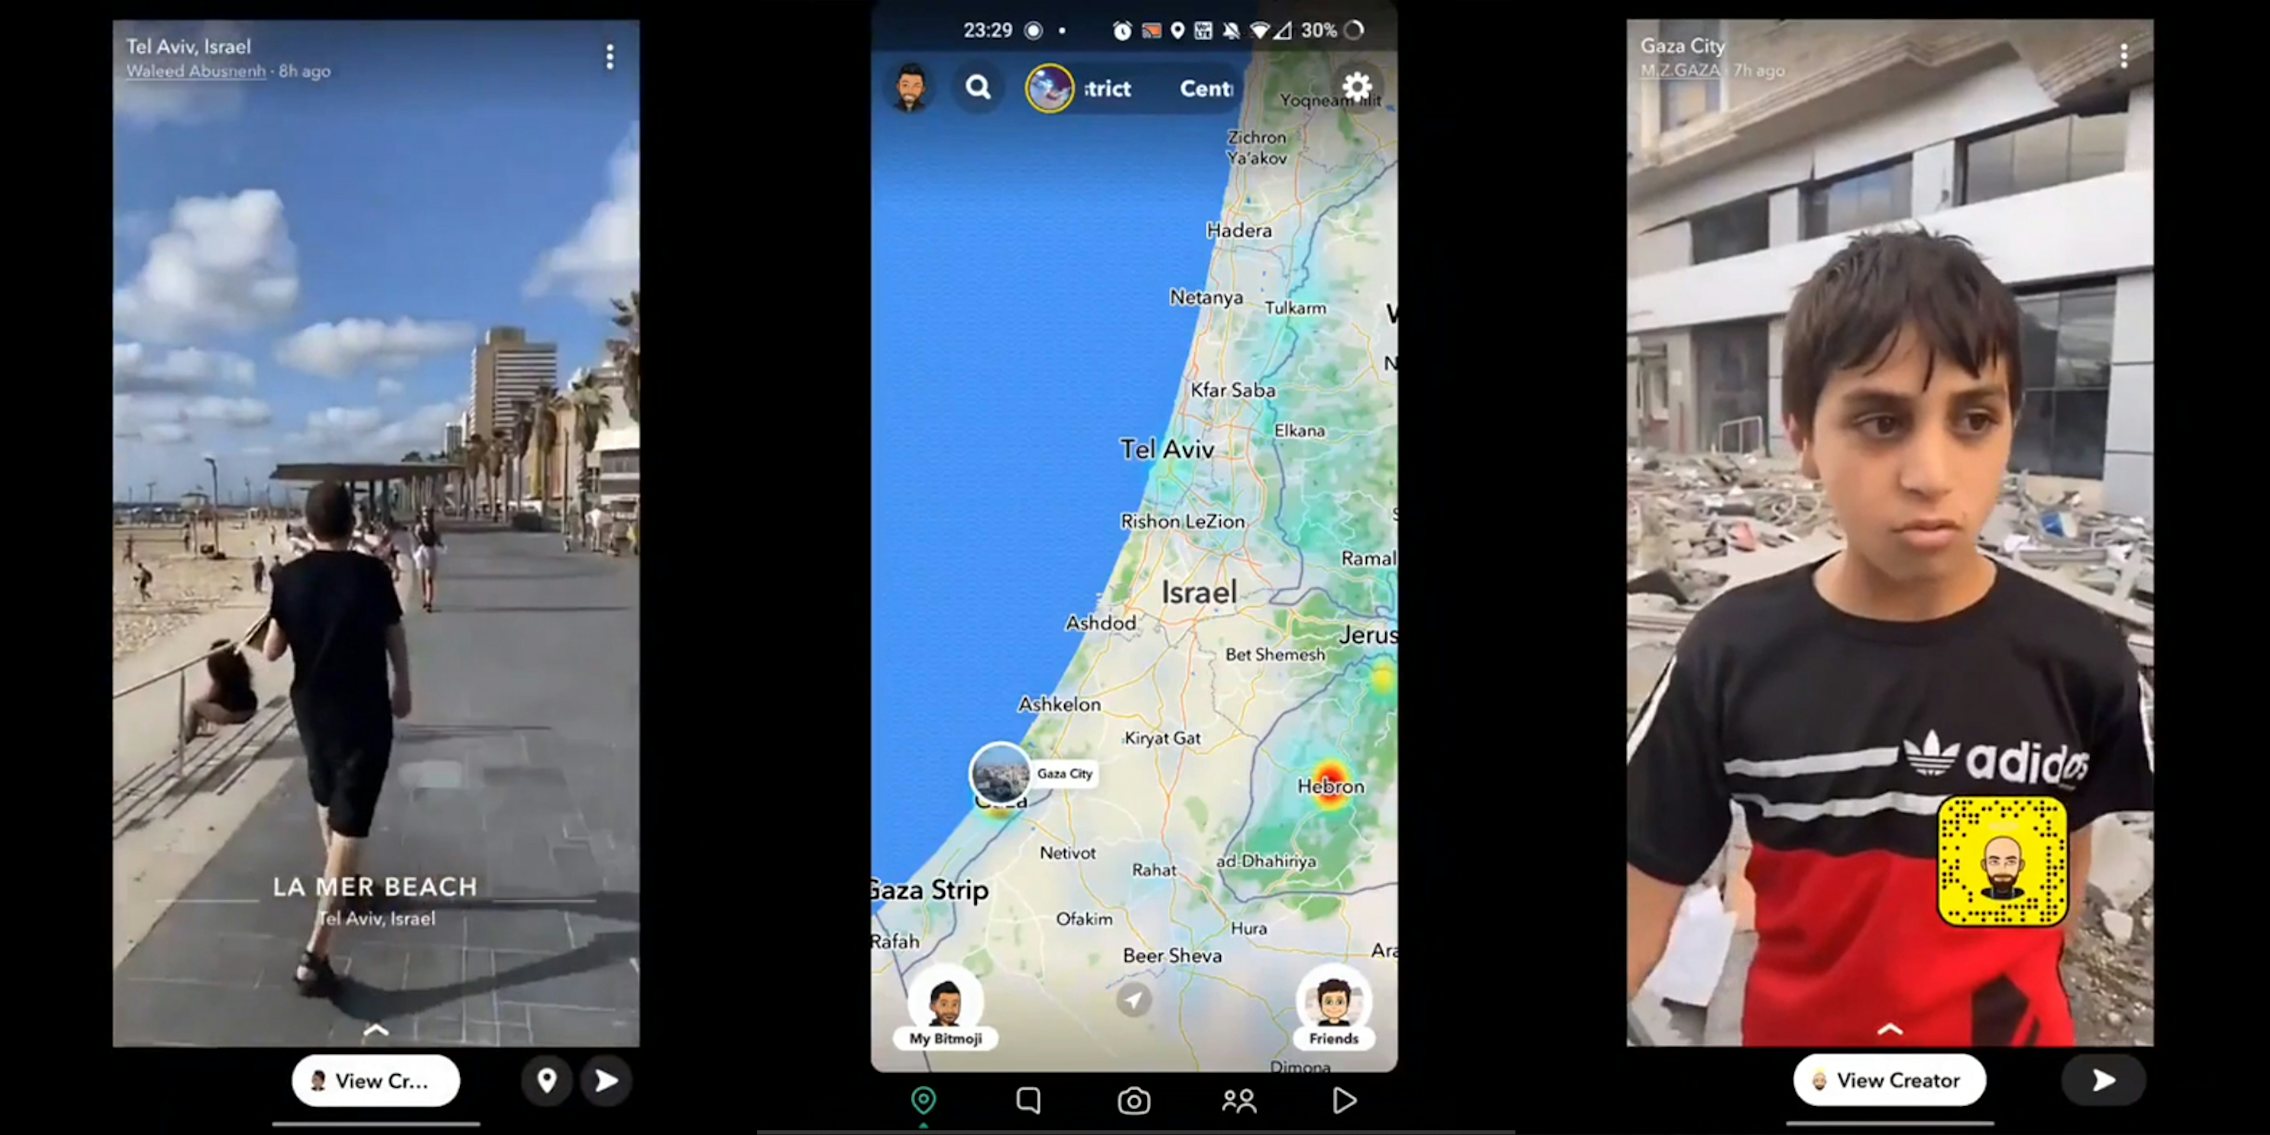 people enjoying a sunny day at the beach, Tel Aviv (l) snapchat map of Israel (c) young boy stands in front of bombed out rubble, Gaza City (r)